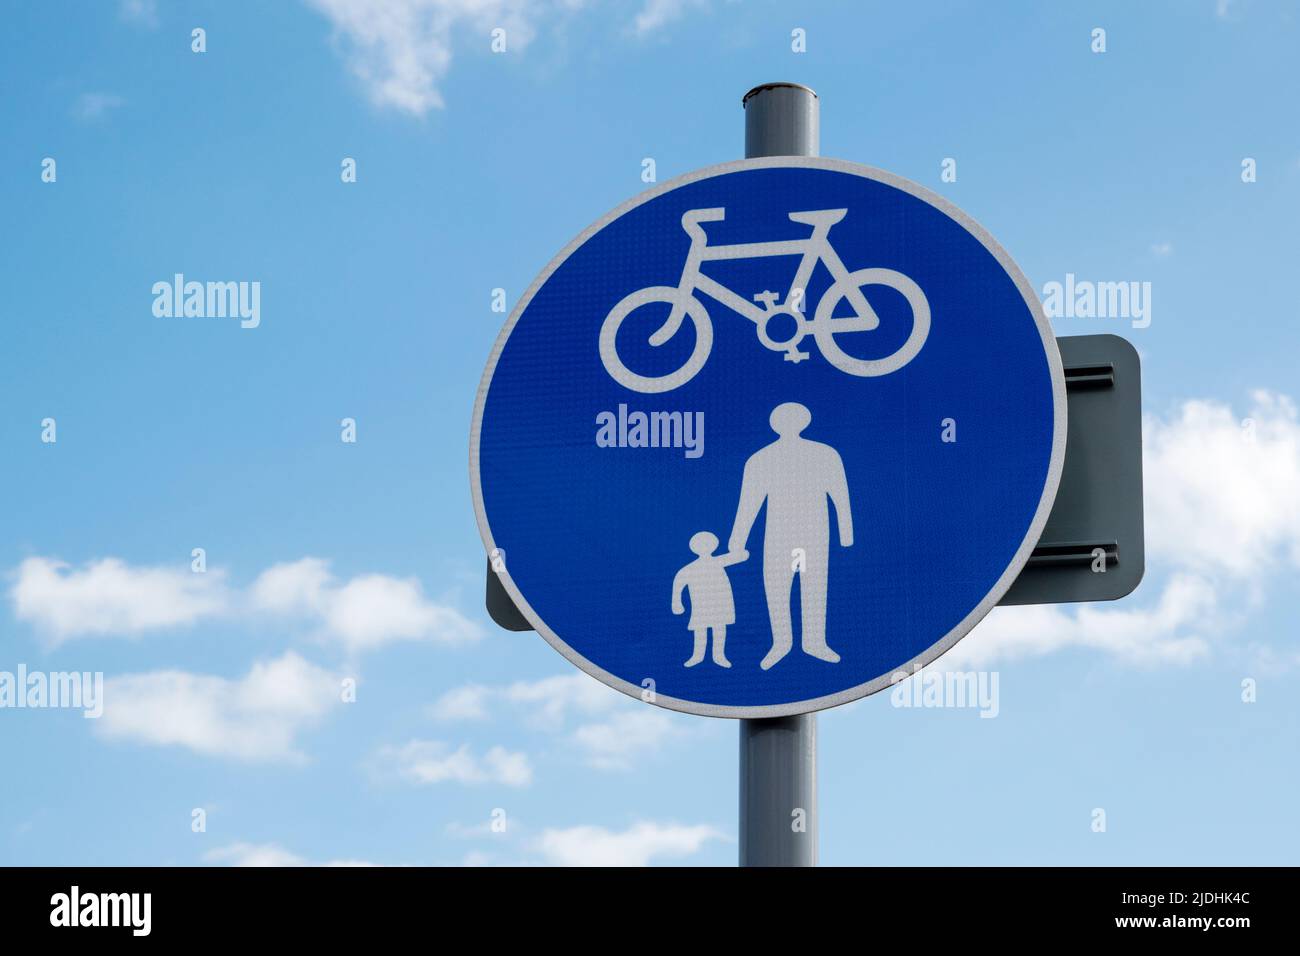 A roadsign indicating an unsegregated mixed use lane that is for use of both pedestrians and cyclists. Stock Photo